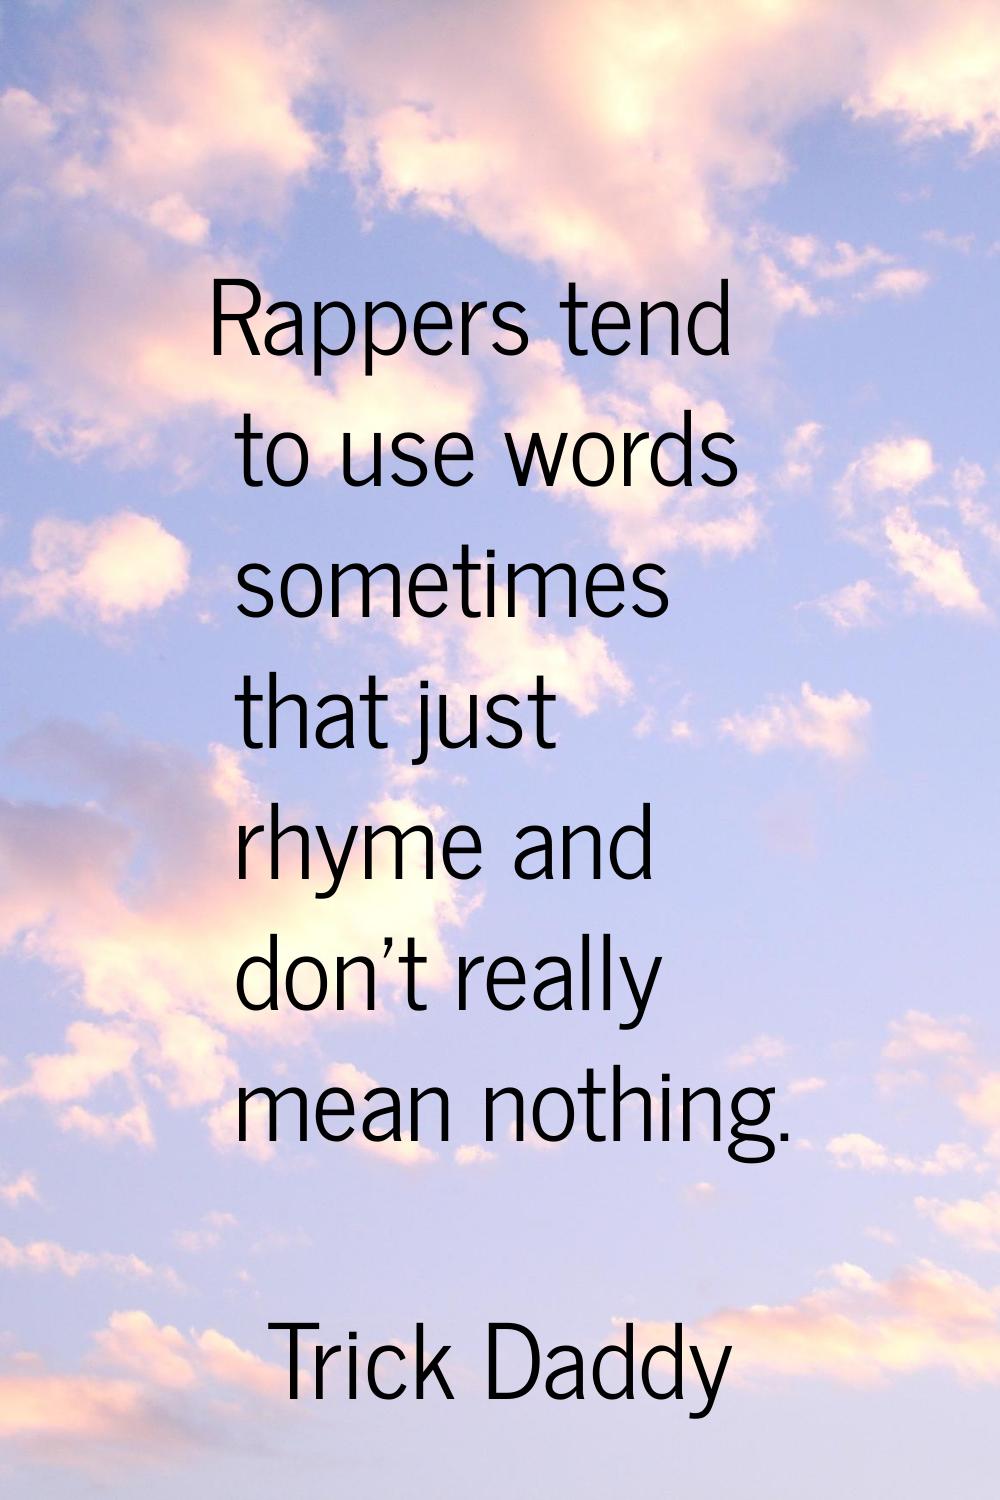 Rappers tend to use words sometimes that just rhyme and don't really mean nothing.